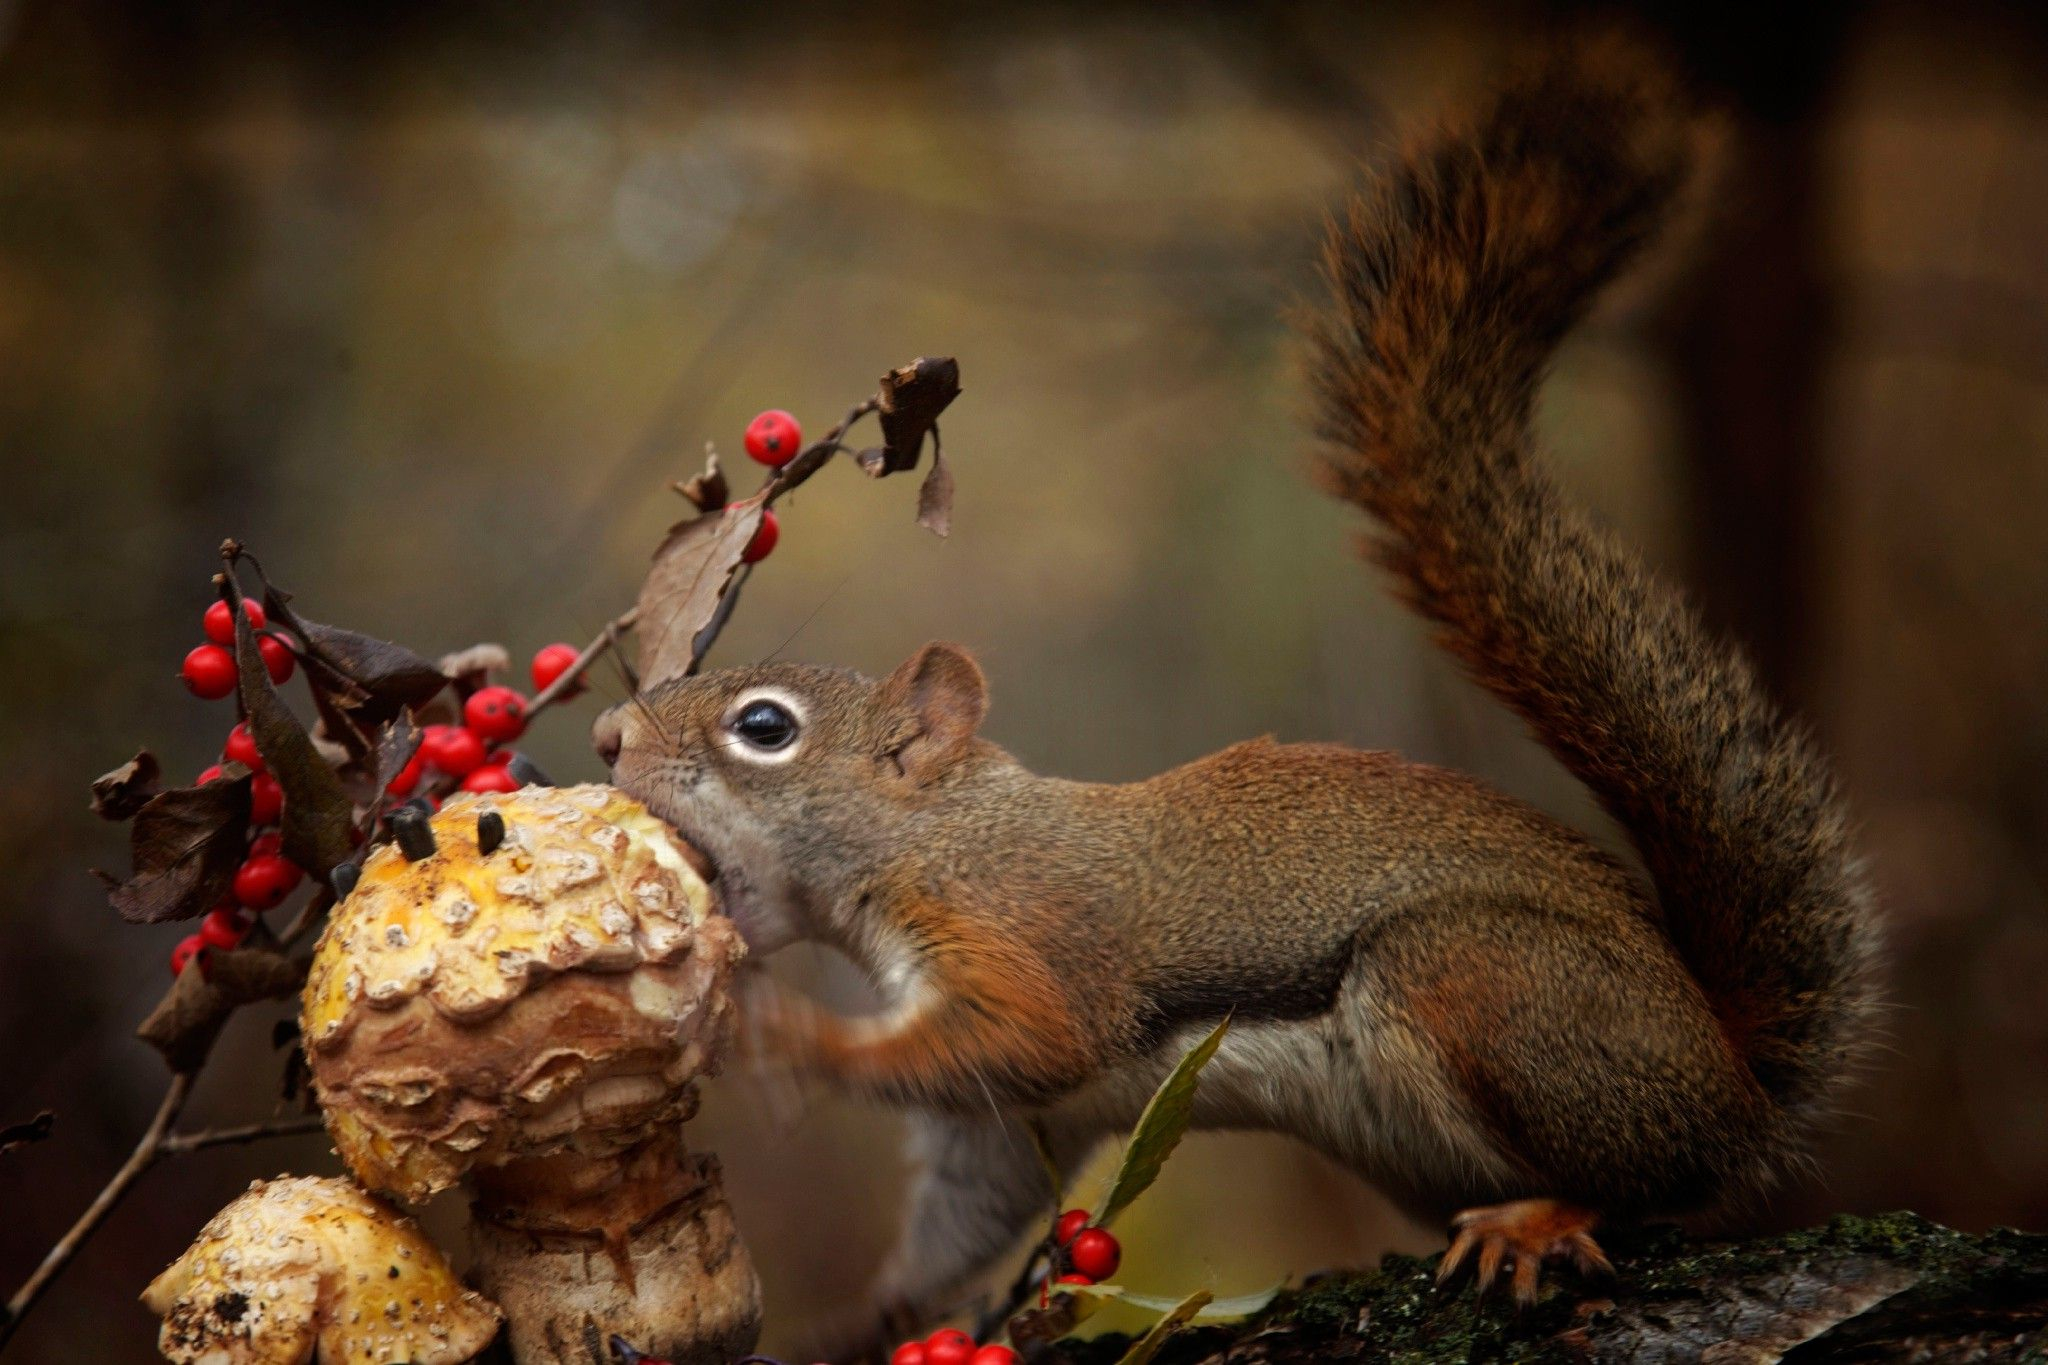 2048x1365 Download hd wallpapers of 196146-animals, Squirrel, Mushroom, Eating. Free download High Quality and Widescreen Resolutions Desktop &acirc;&#128;&brvbar; | Squirrel, Animals, N animals